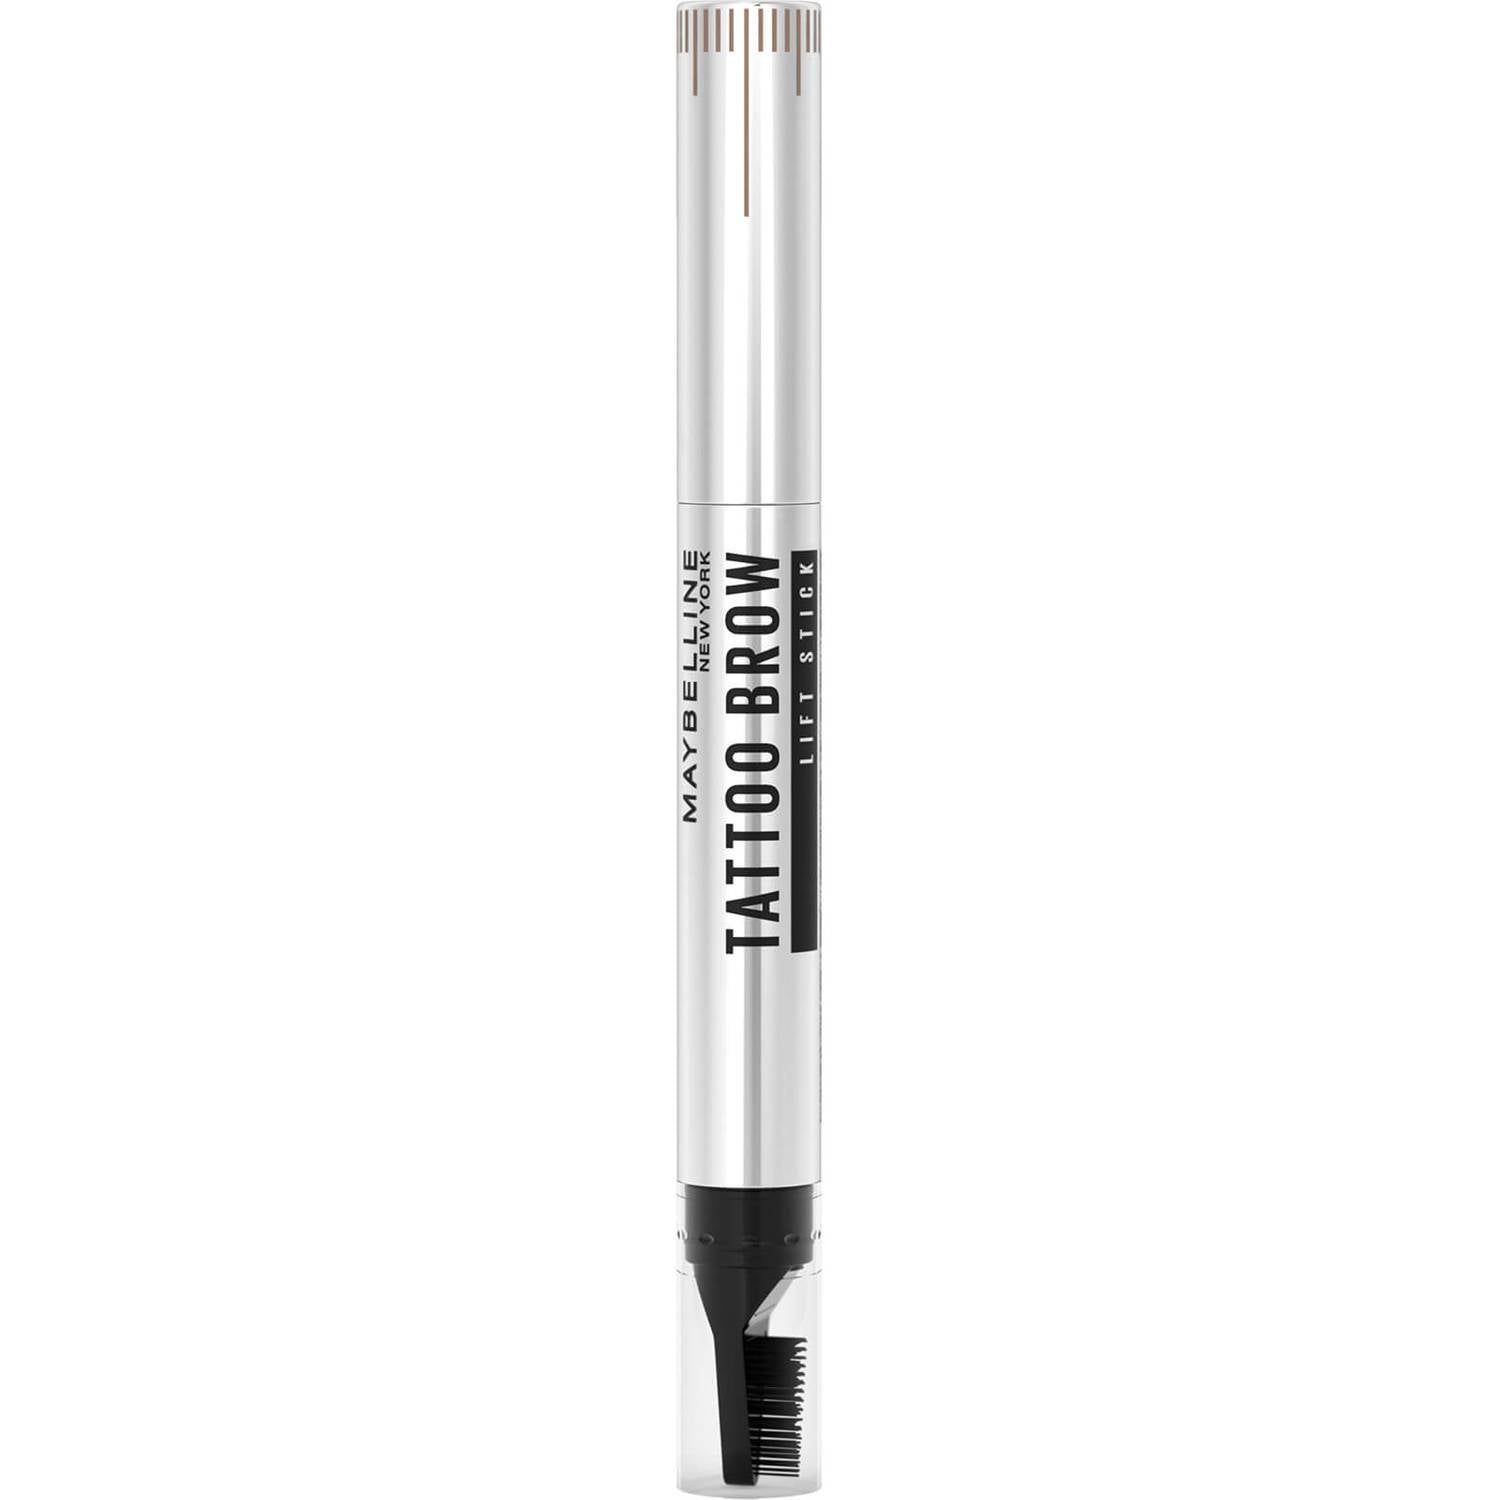 Maybelline Tattoo Studio Brow Lift Stick 24g Various Shades - Give Us Beauty